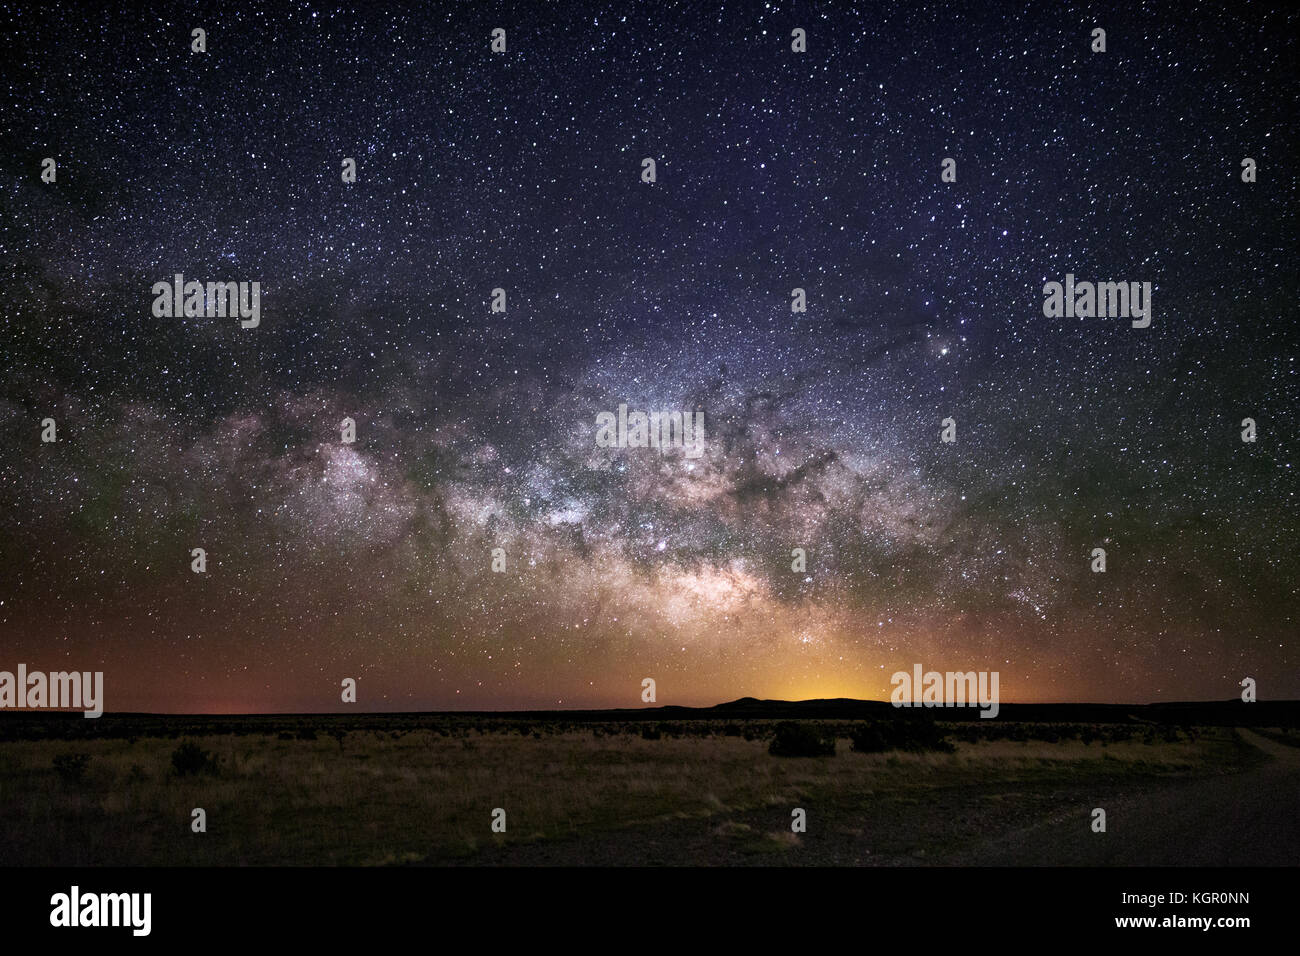 The Milky Way rising with stars in the night sky near Roswell, New Mexico Stock Photo